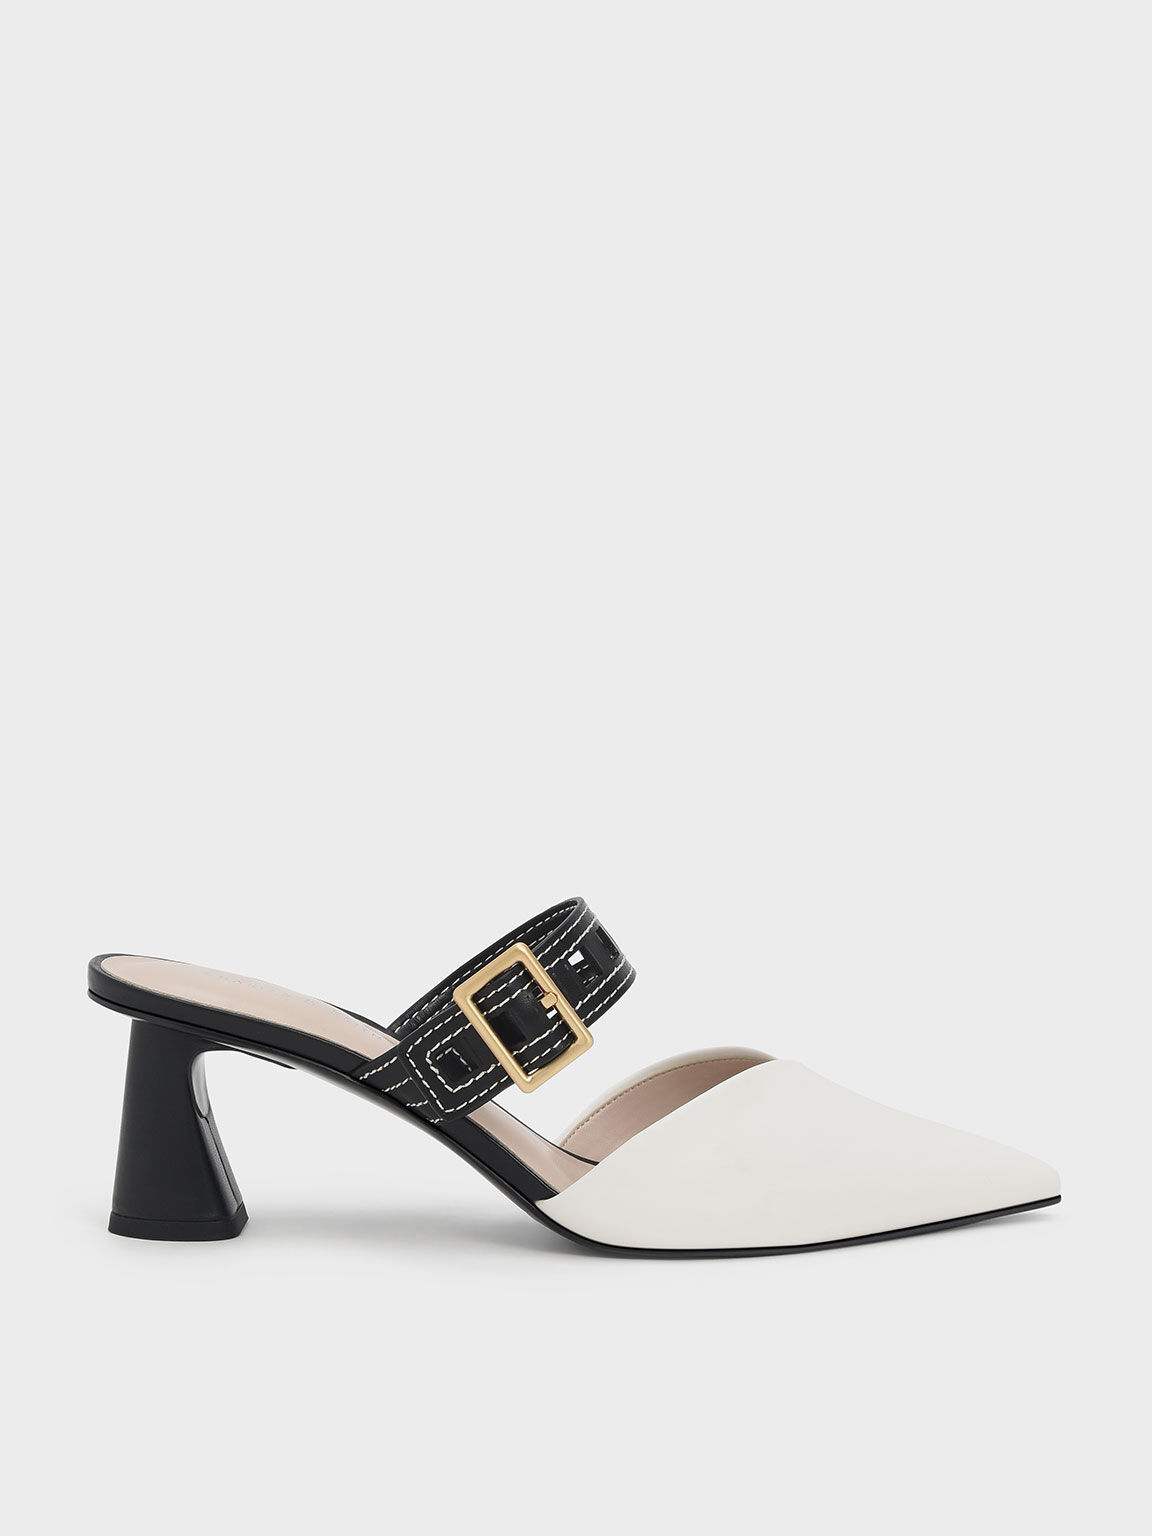 White Strappy Toe Ring Sandals - CHARLES & KEITH QA